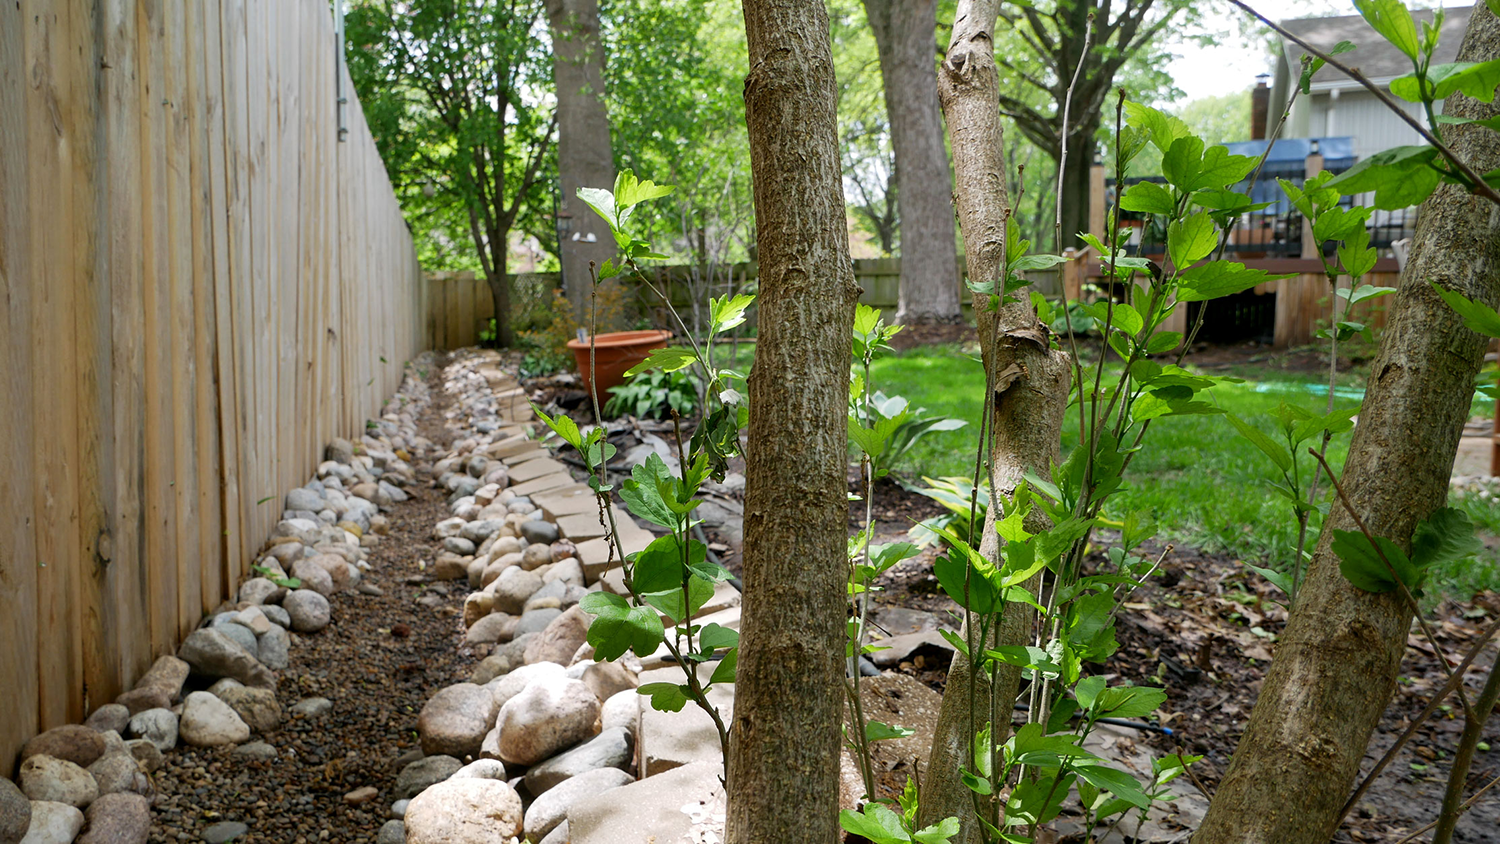 Rocks line a fence in a backyard, surrounded by trees and green grass.